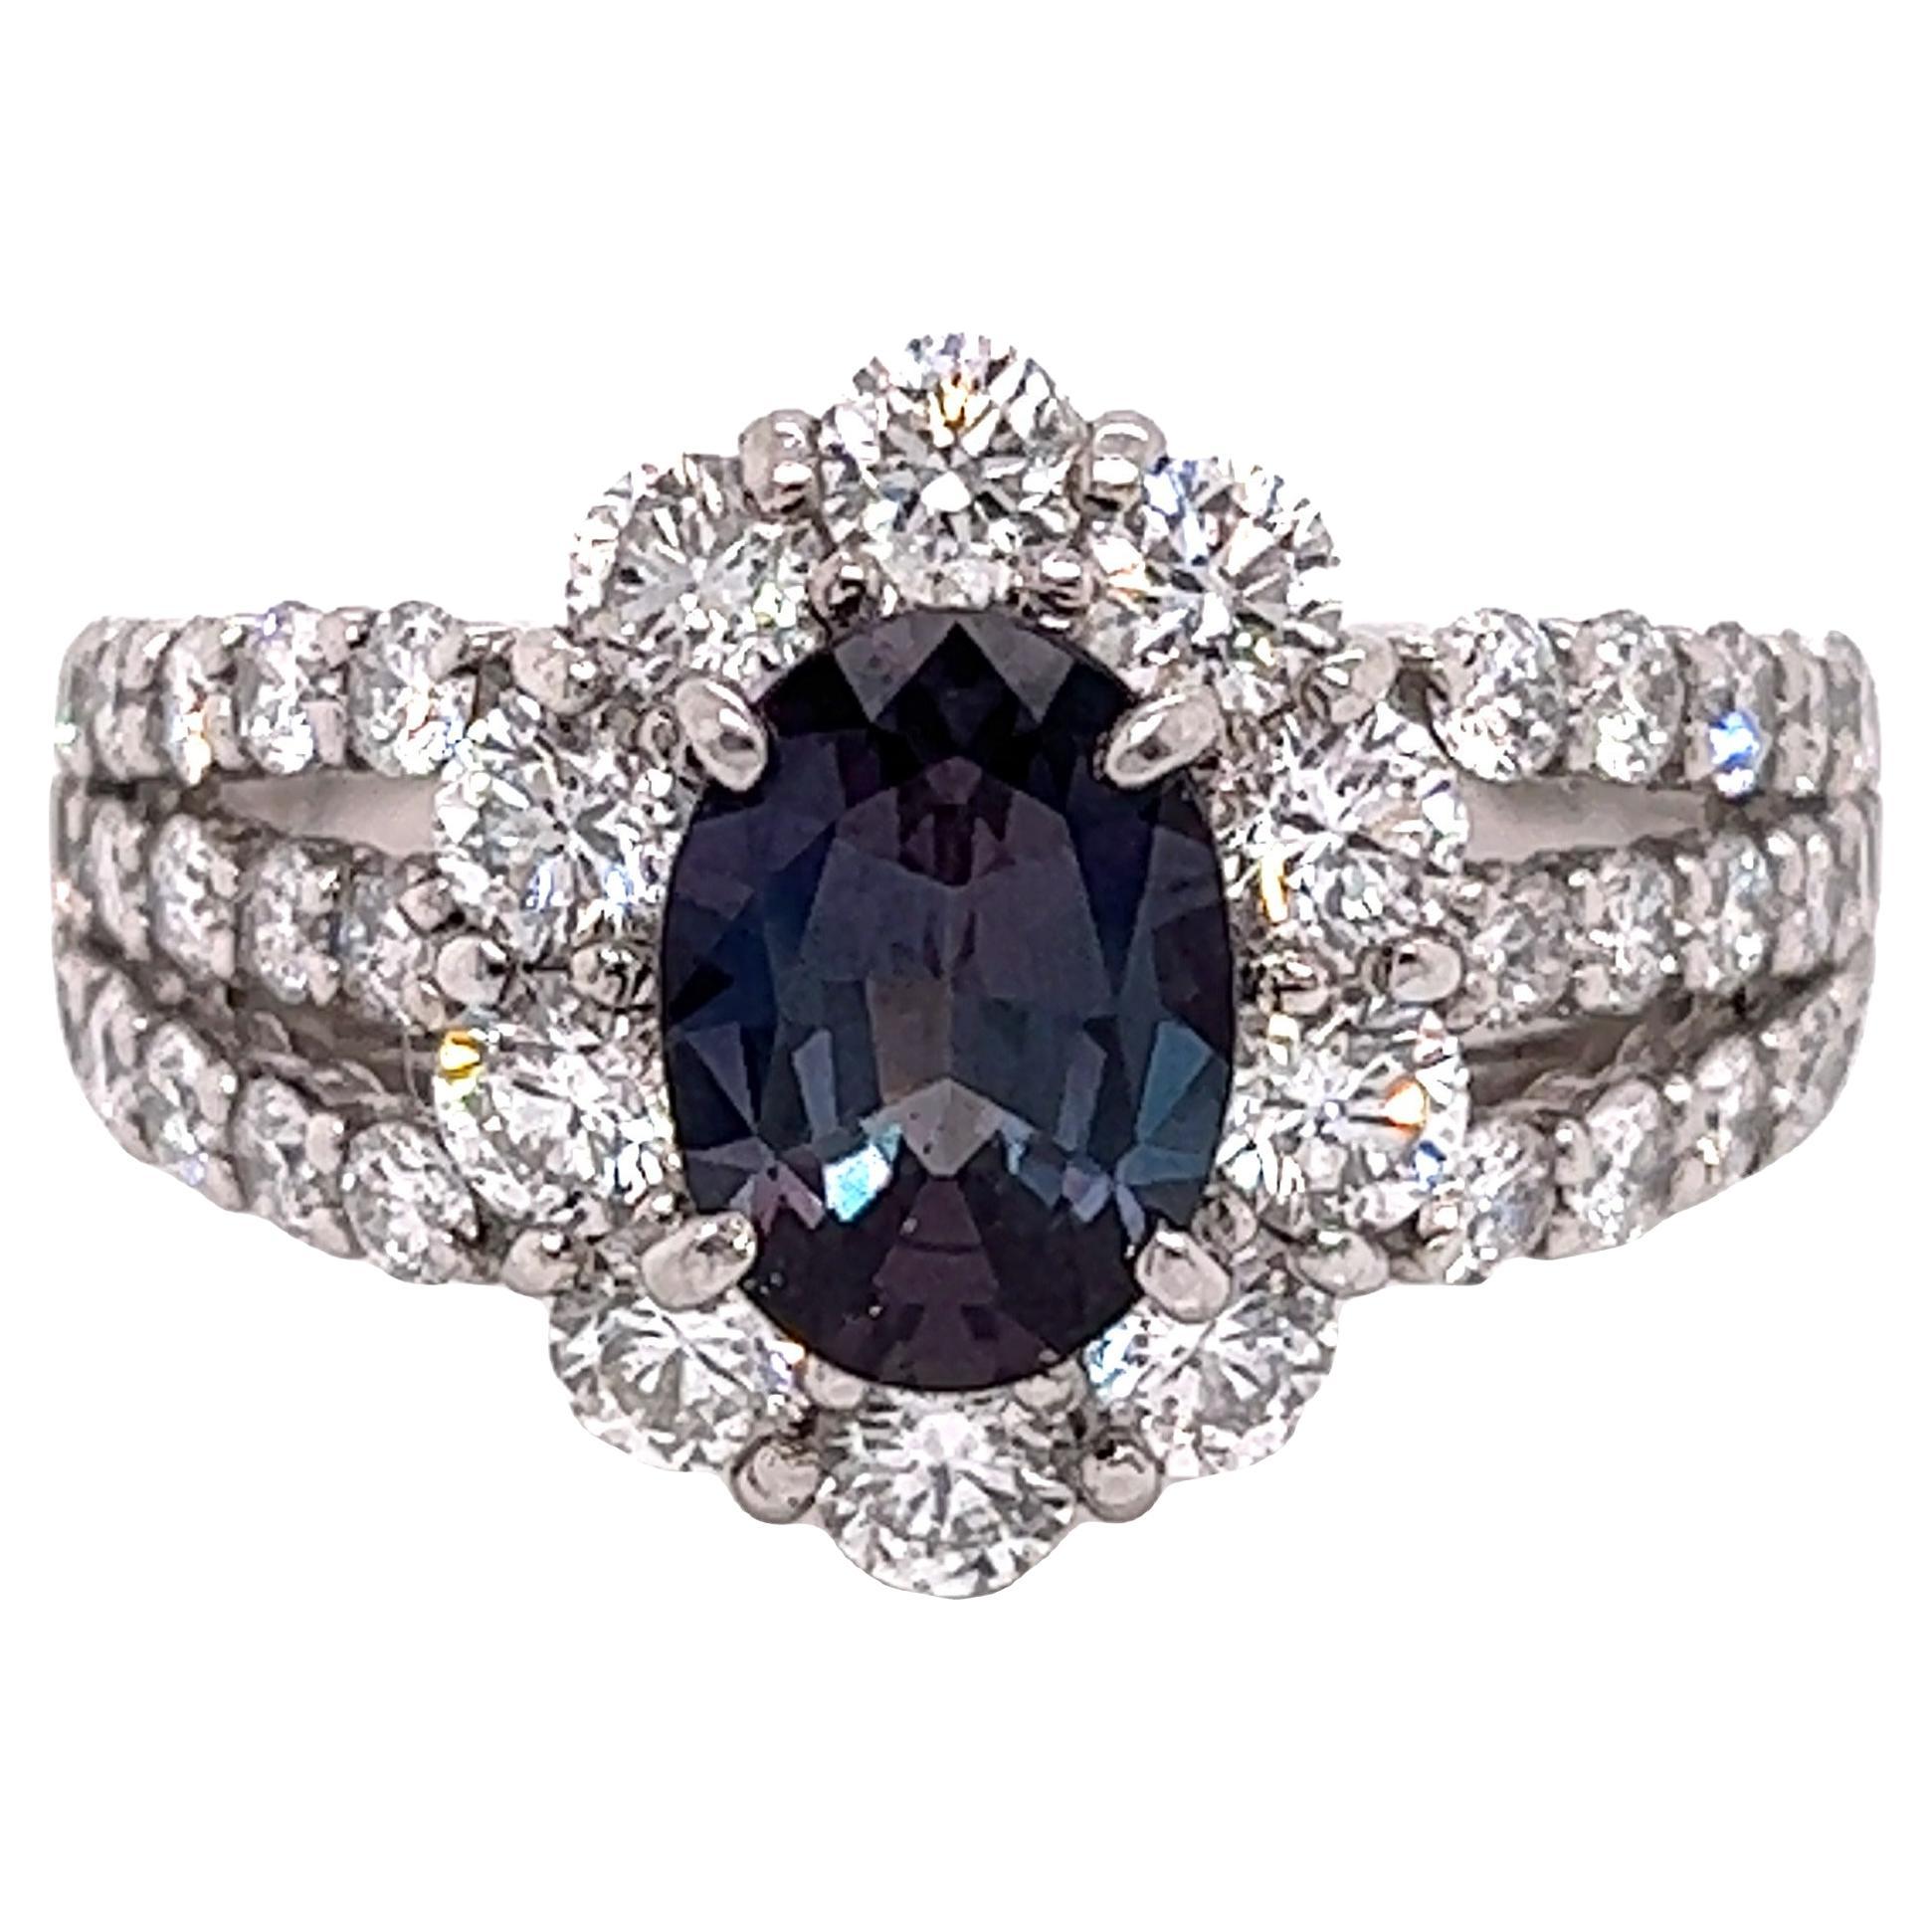 Natural GIA Certified 1.51 Ct. Brazillian Alexandrite & Diamond Cocktail Ring For Sale